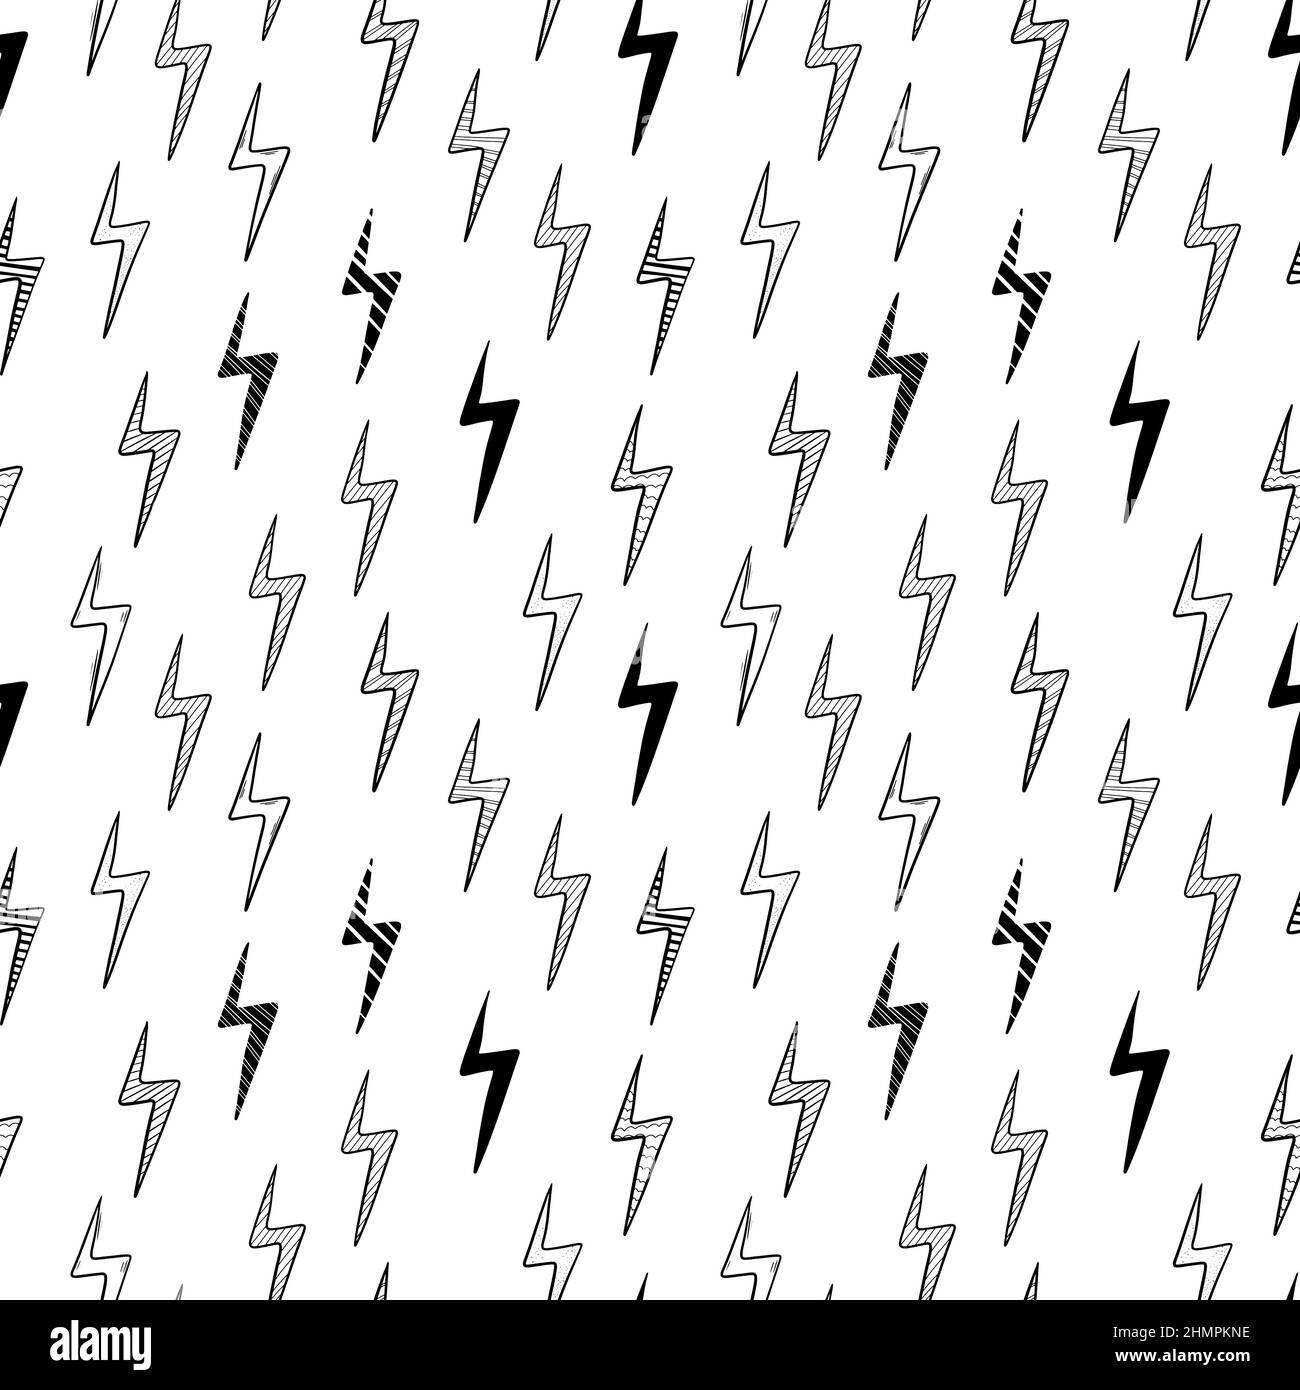 Hand drawn vector doodle electric lightning bolt symbol seamless pattern. Stock Vector